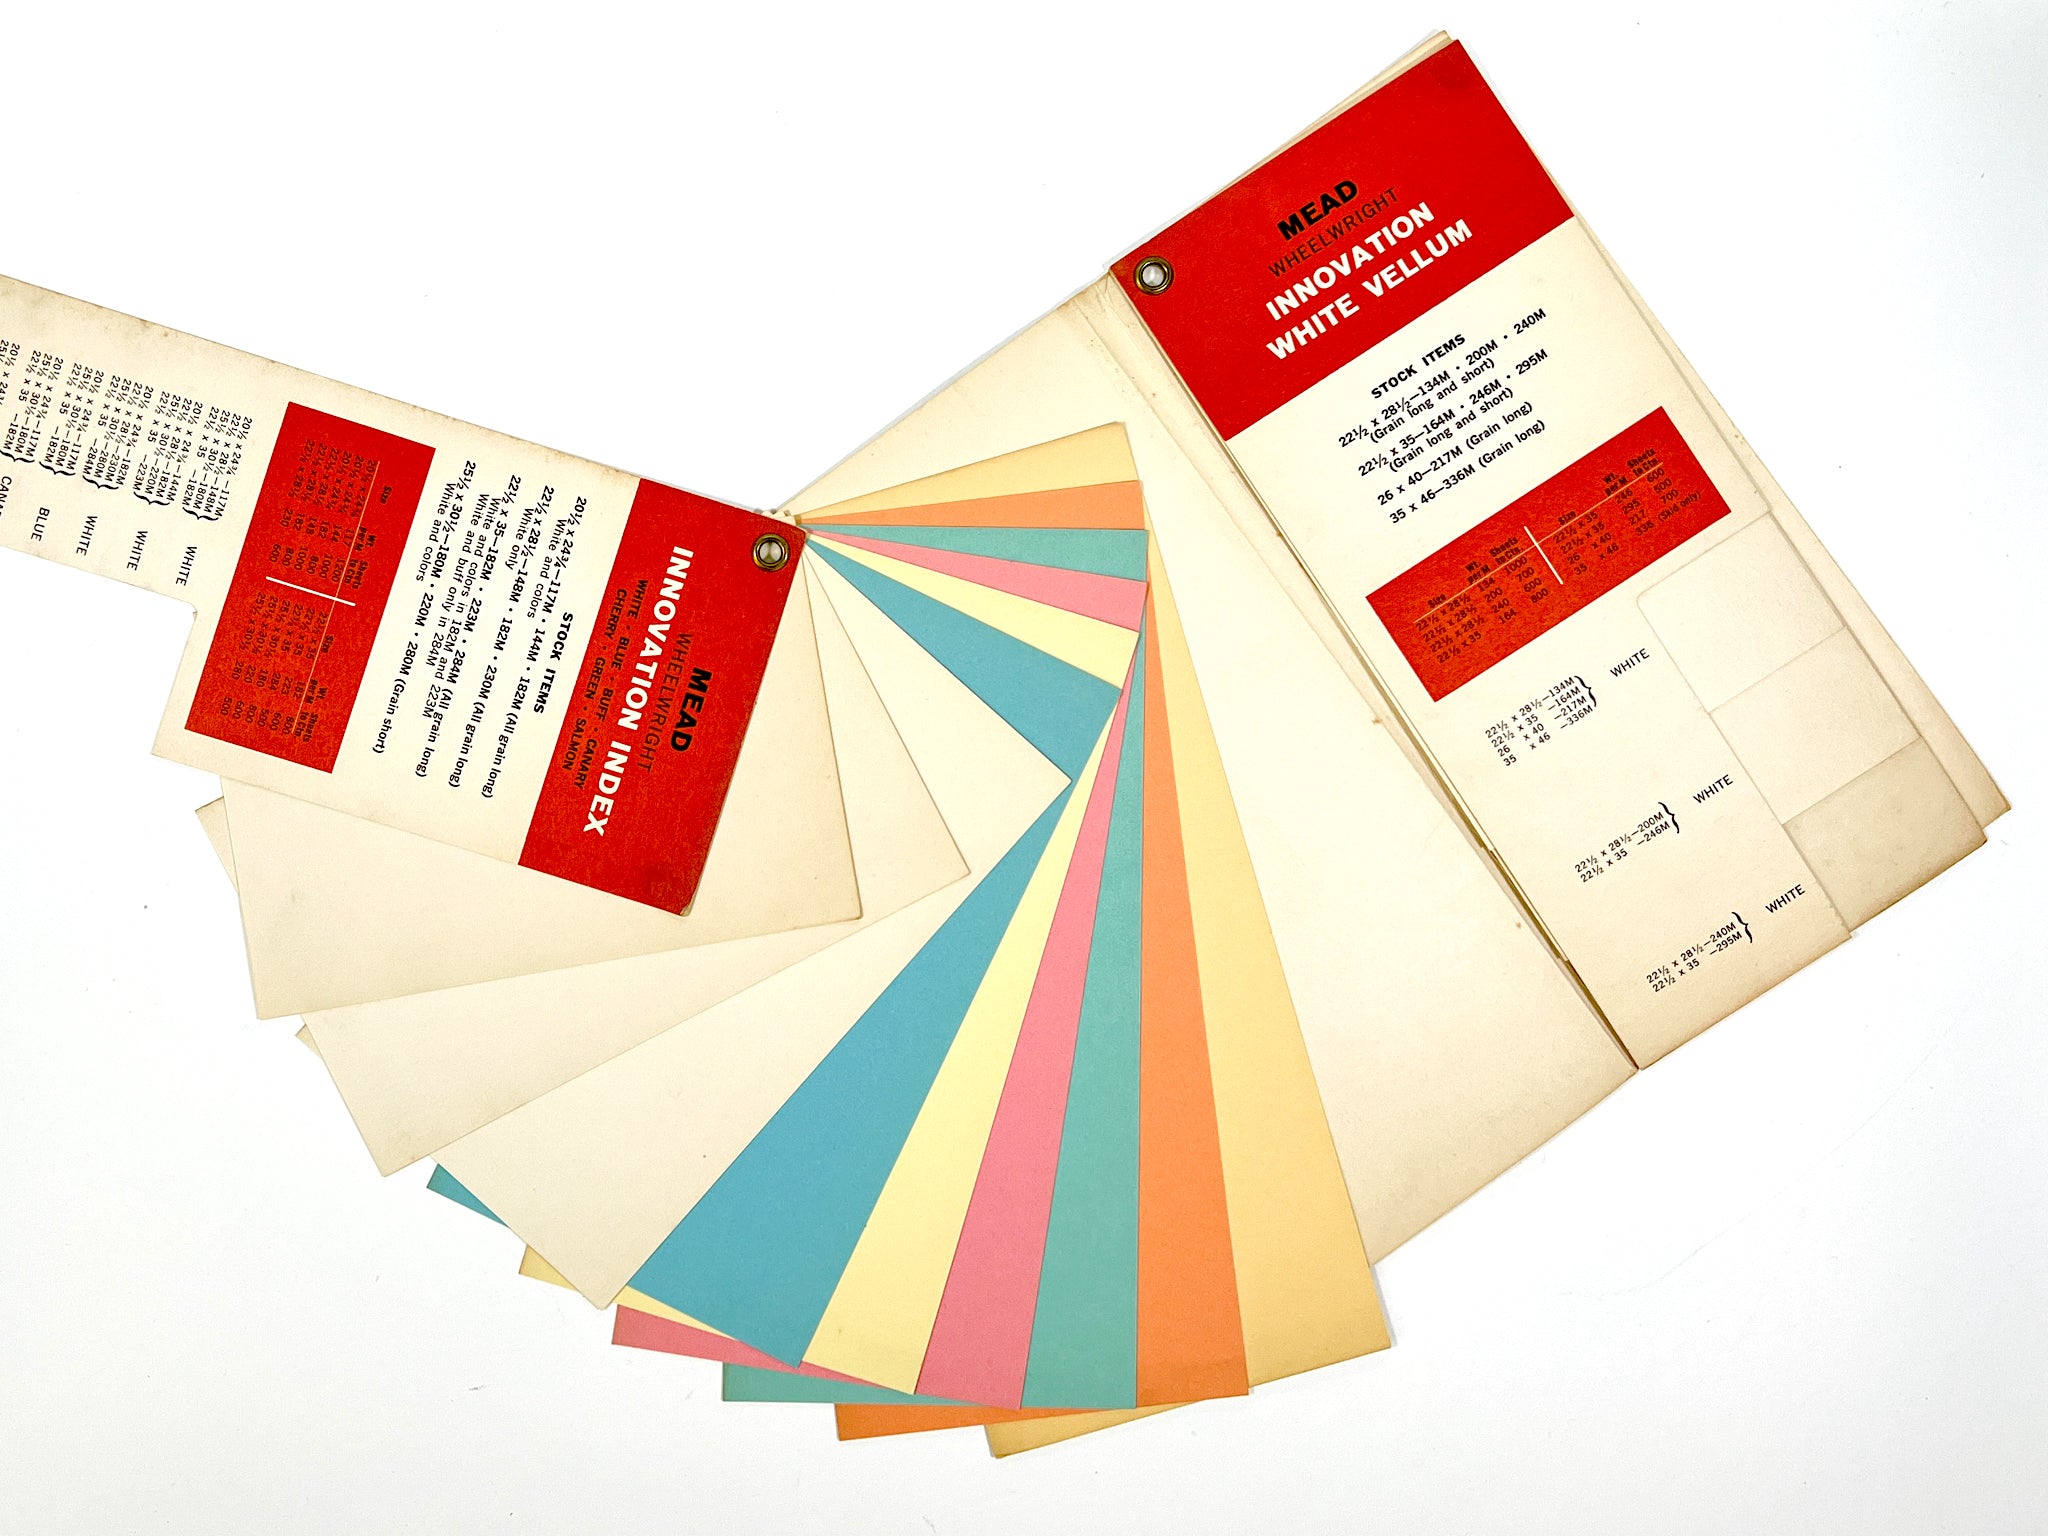 Mead Wheelwright Innovation Index and White Vellum (paper sample book)